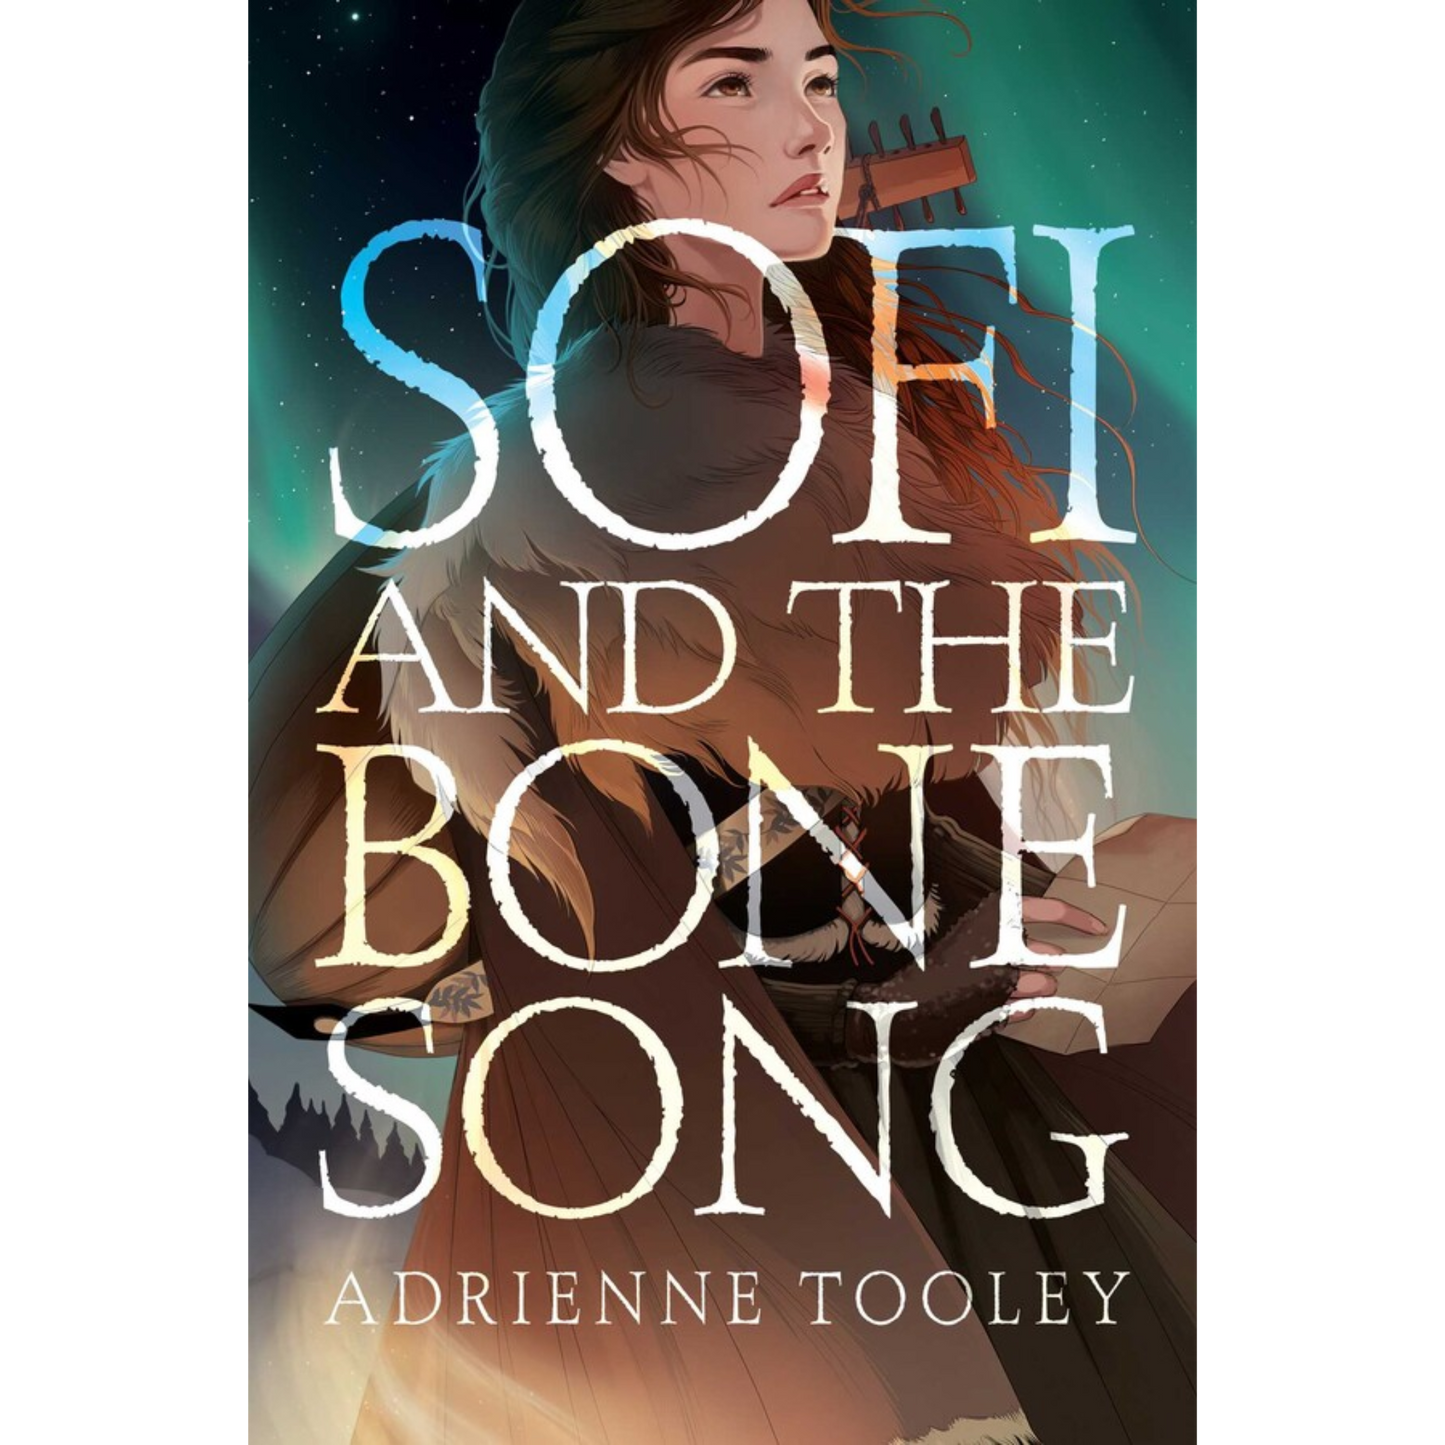 sofi and the bone song adrienne tooley